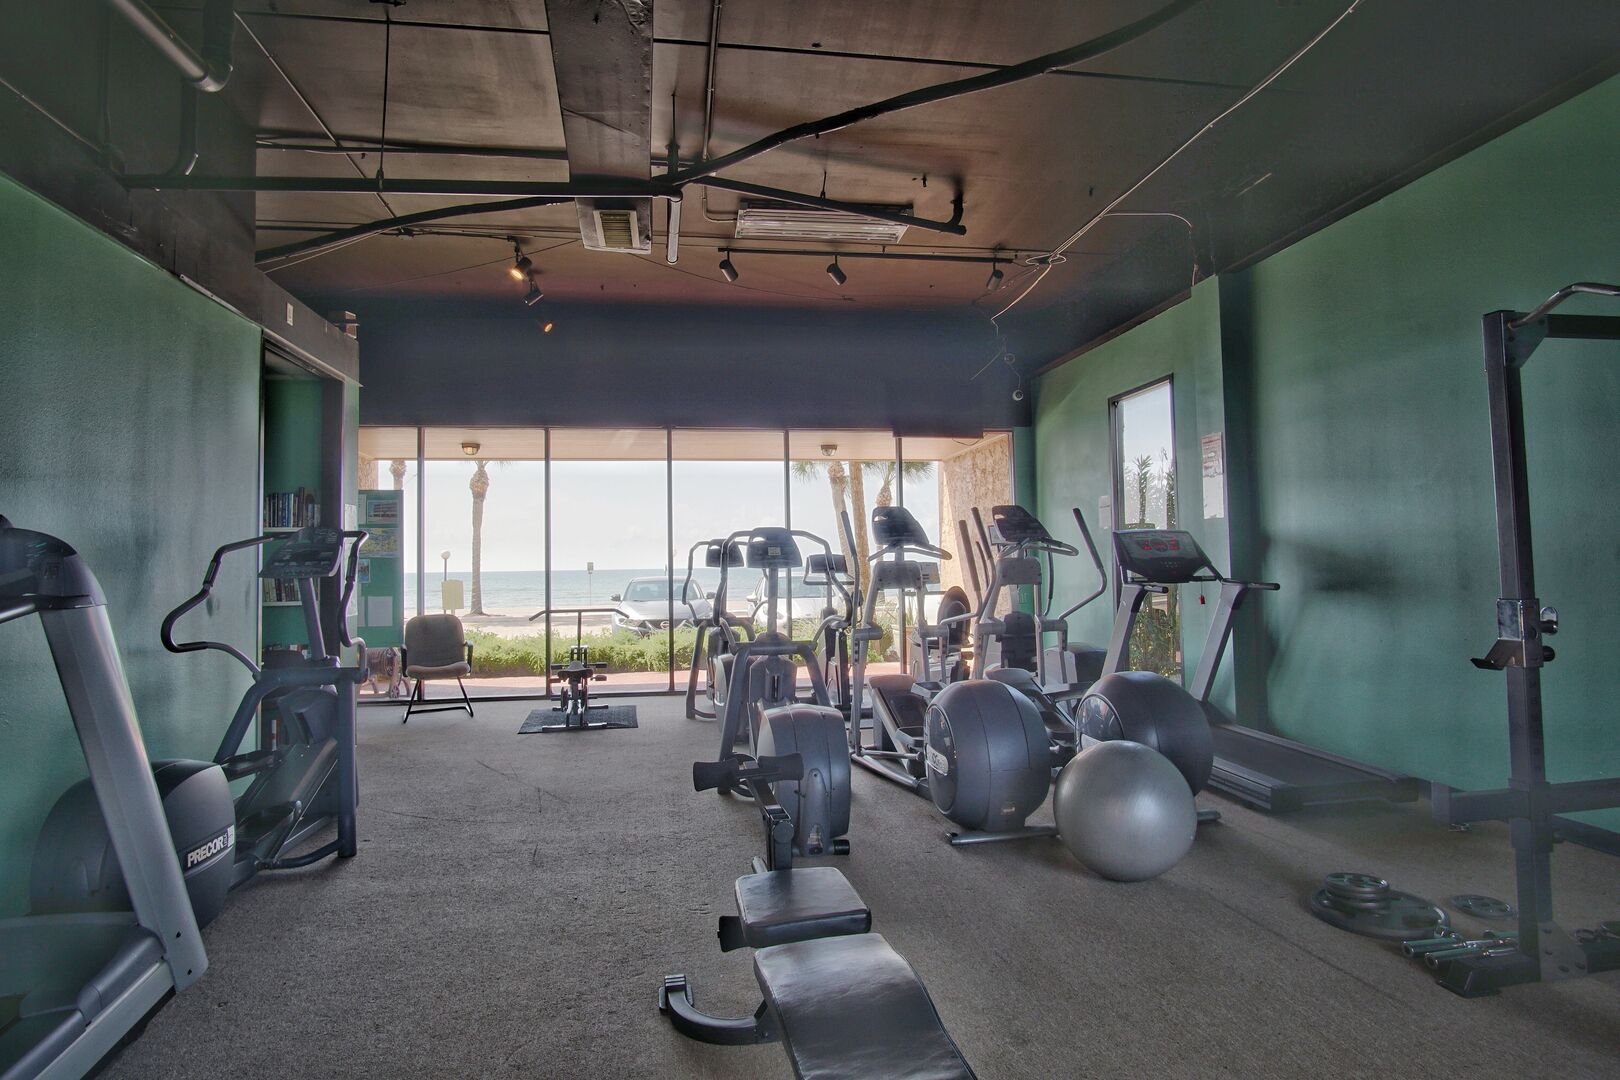 FITNESS CENTER LOCATED IN THE FRONT OF THE BUILDING.